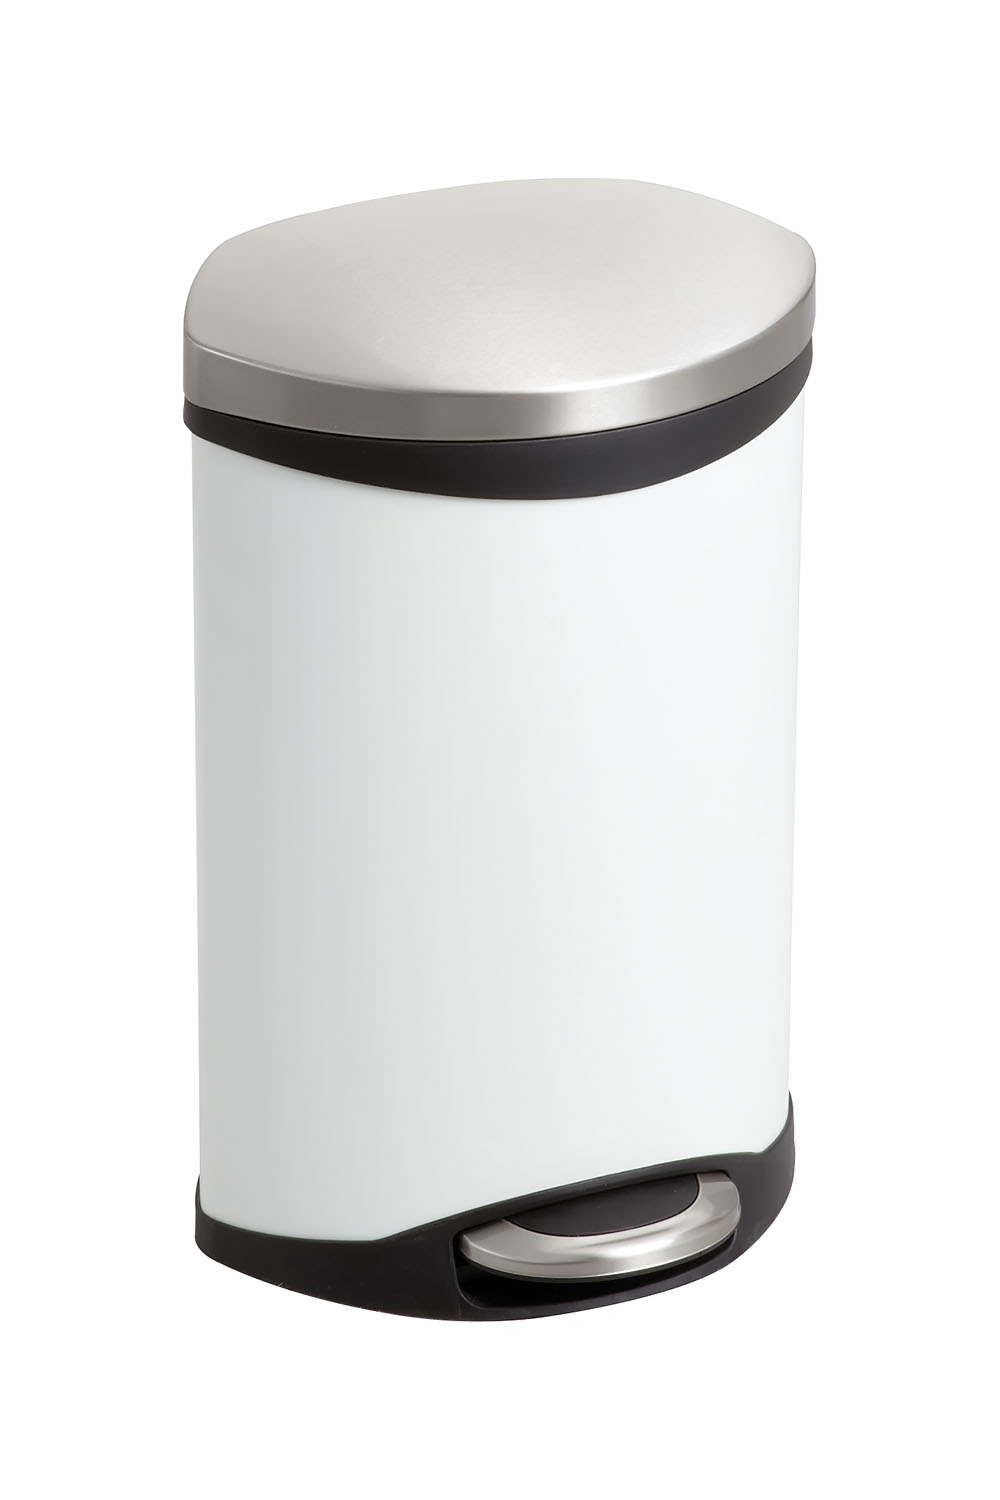 Safco Ellipse Hands Free Step-On Receptacle - 3 gal Capacity - 17" Height x 12" Width x 8.5" Depth - Plastic - White - 1 Each